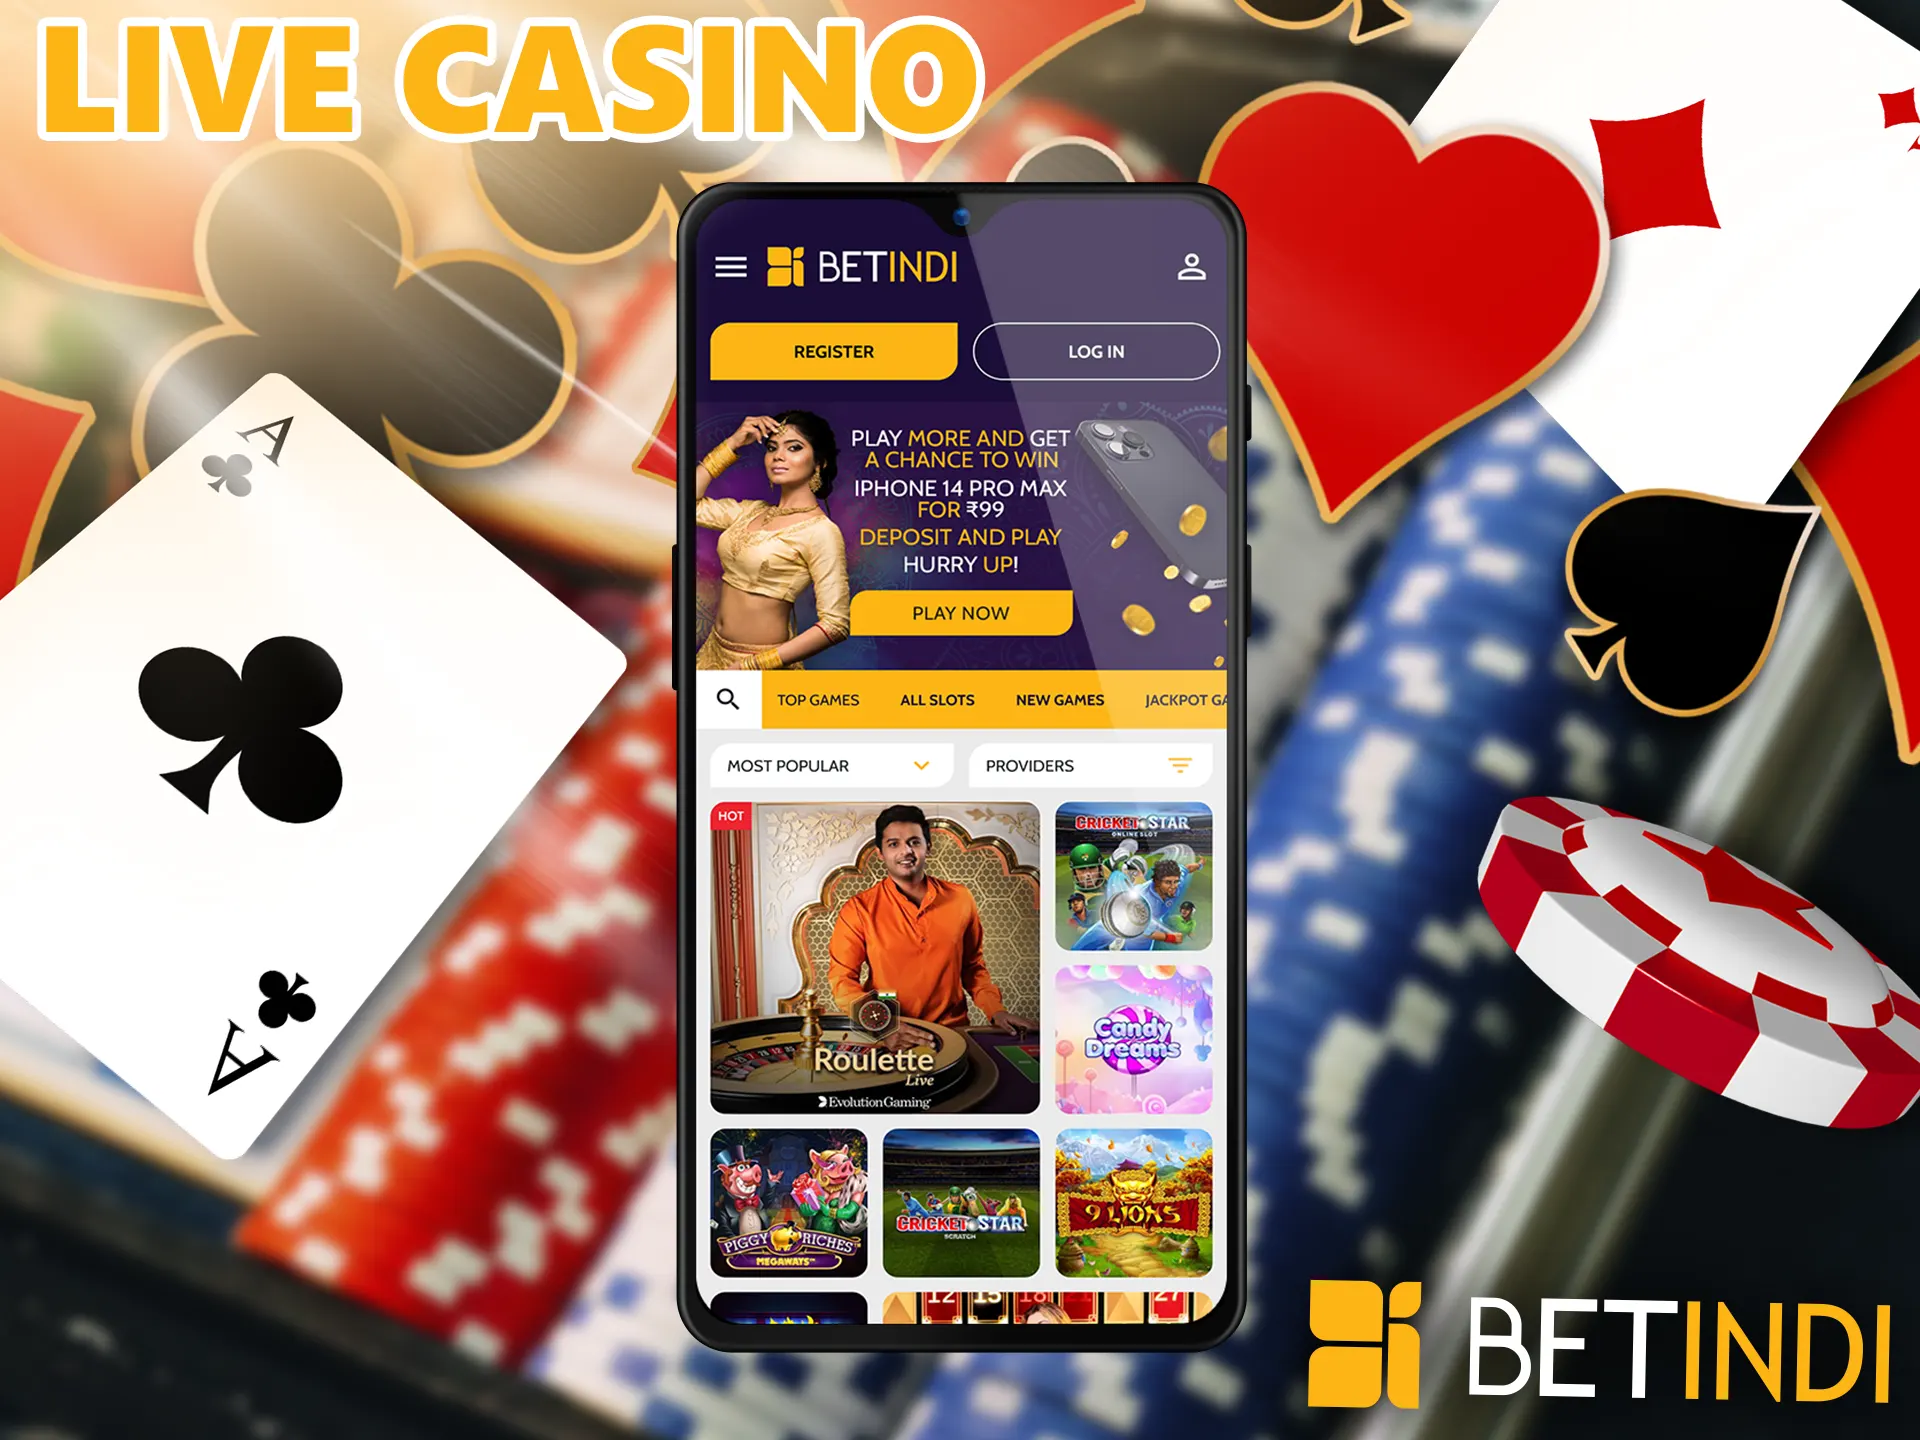 This section BetIndi online casino players are strong interest in the game is controlled by a live person, which immerses players in the atmosphere of a real casino.